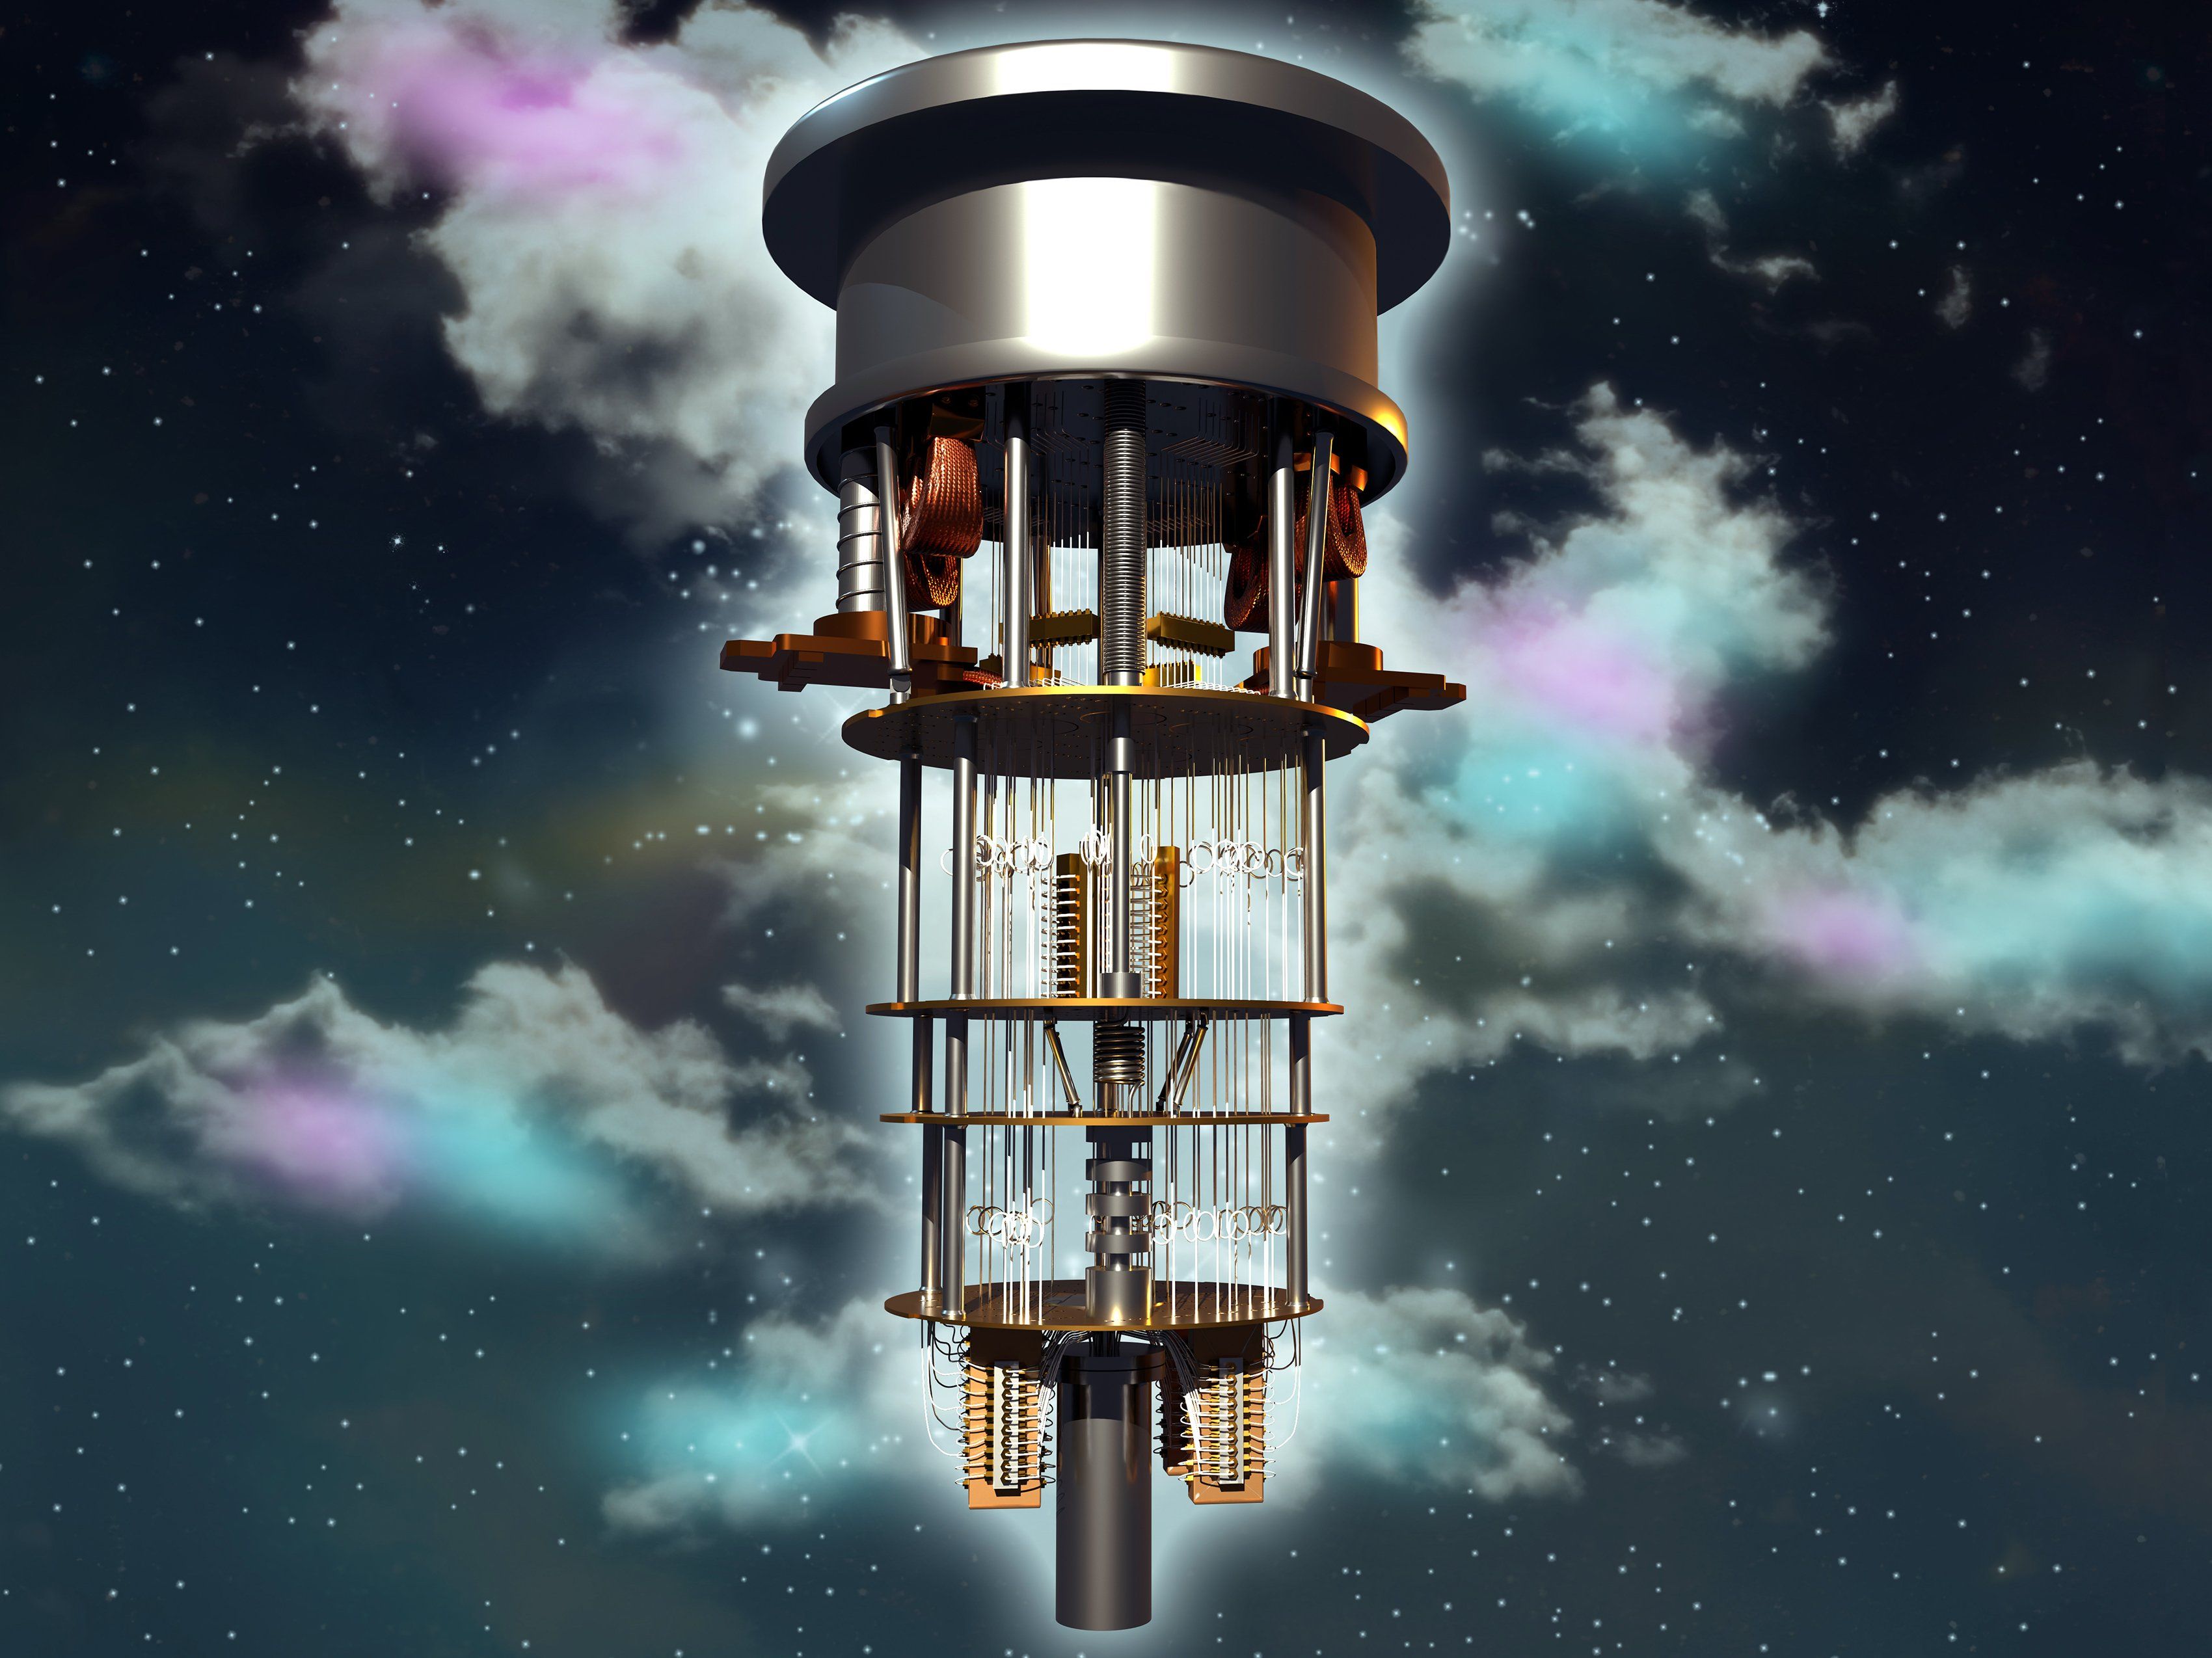 3D illustration of a quantum computer floating with a backdrop of stars and colorful clouds